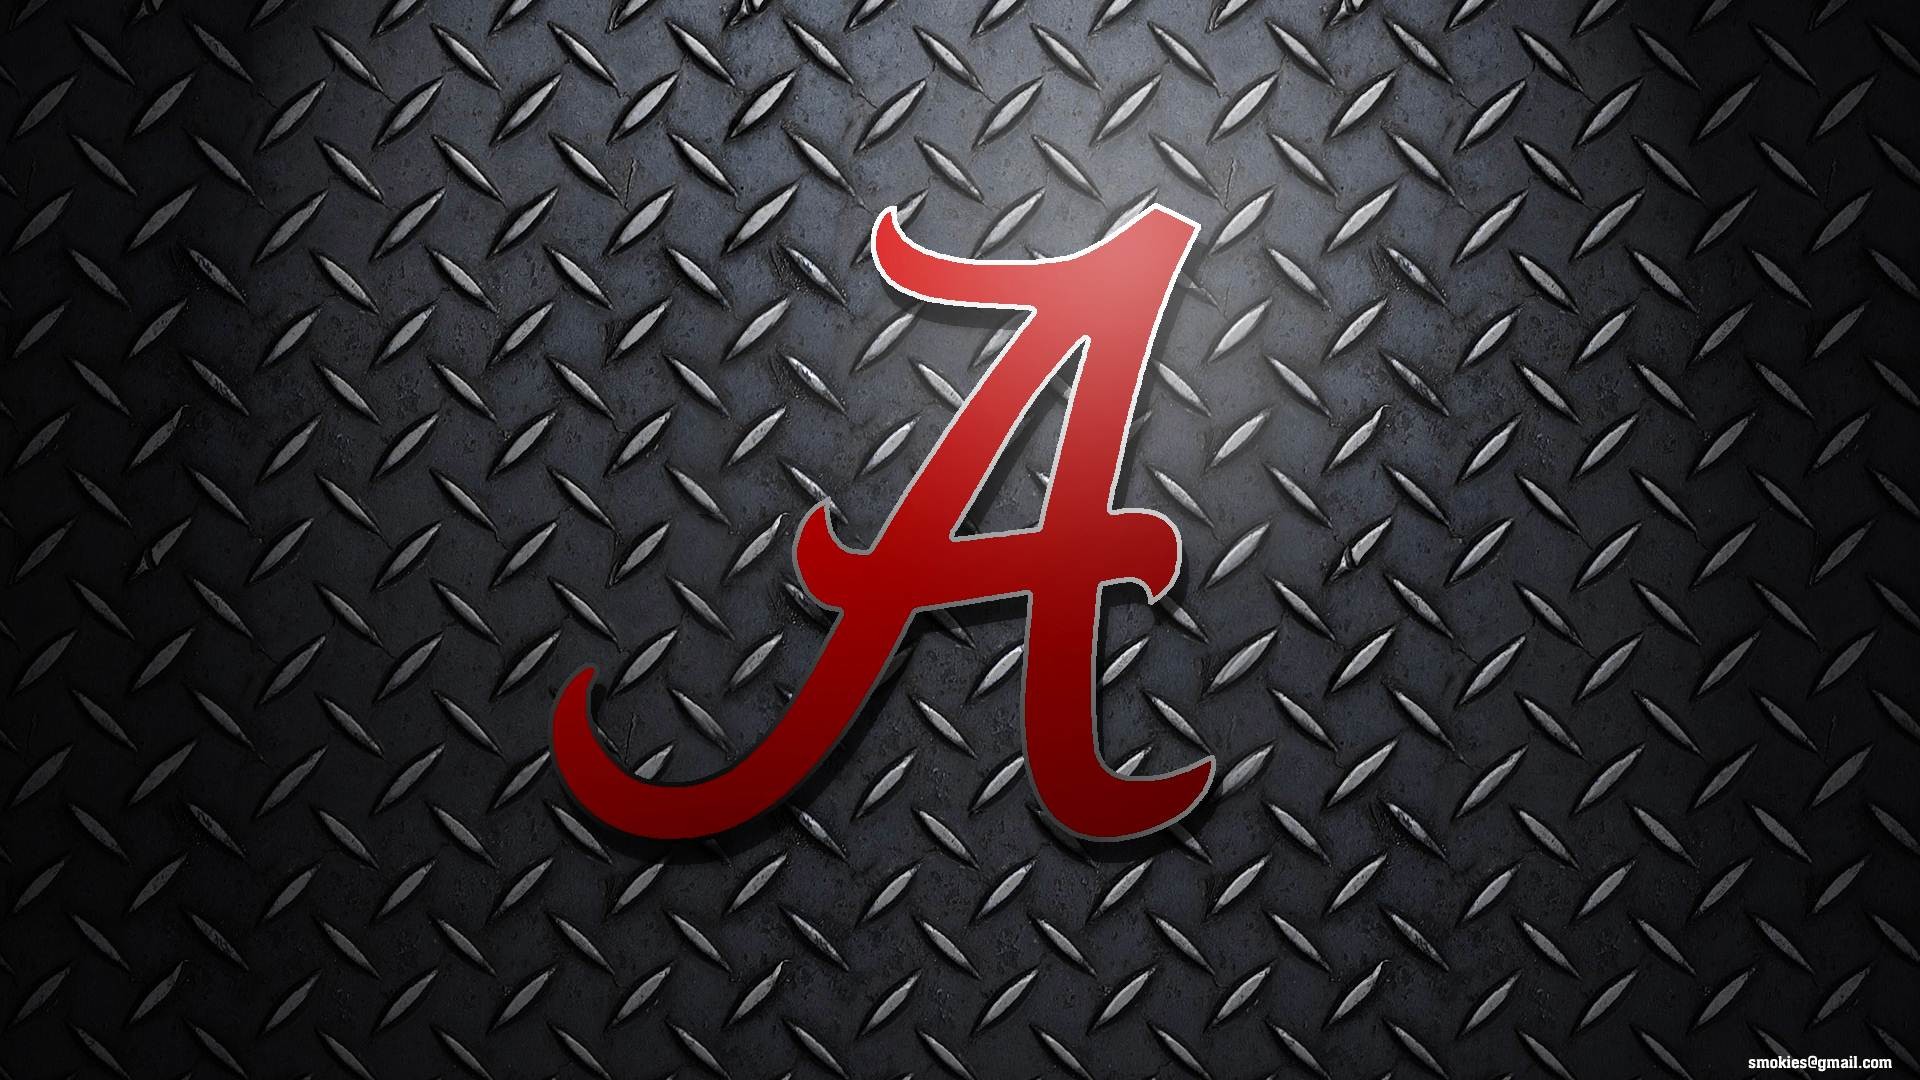 1920x1080 Alabama Crimson Tide Football Wallpaper submited images.